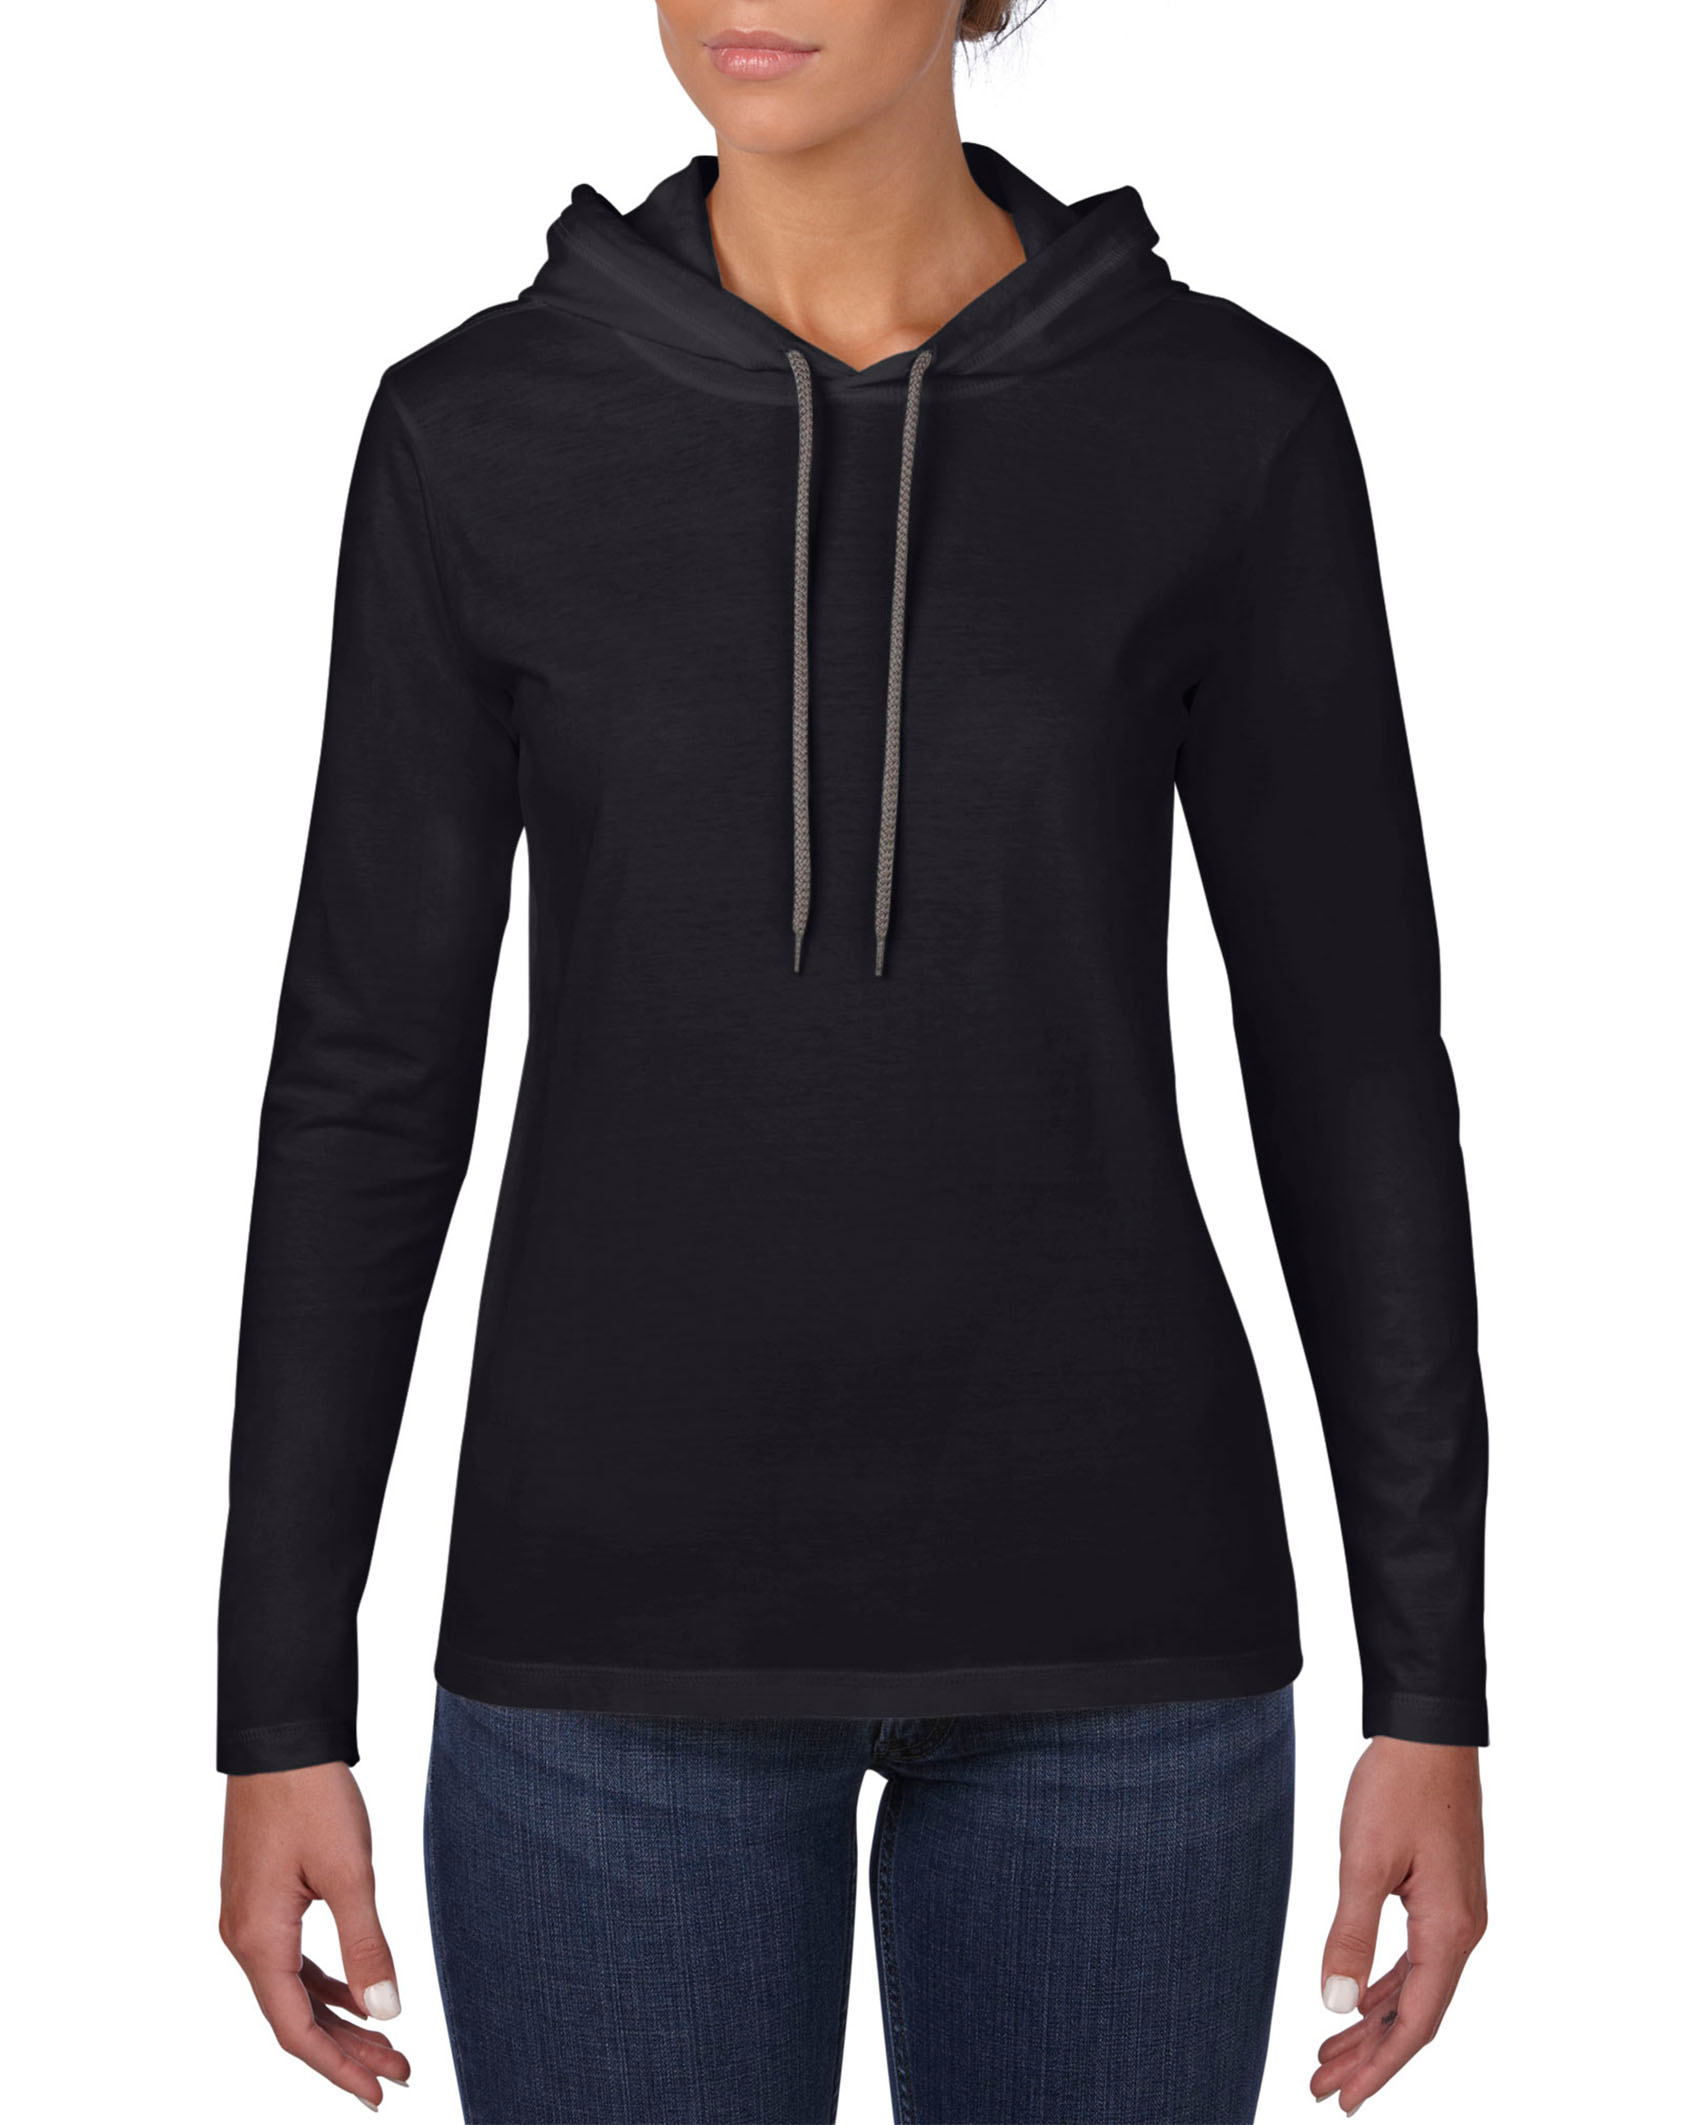 Anvil T-shirt Hooded Lightweight LS for her